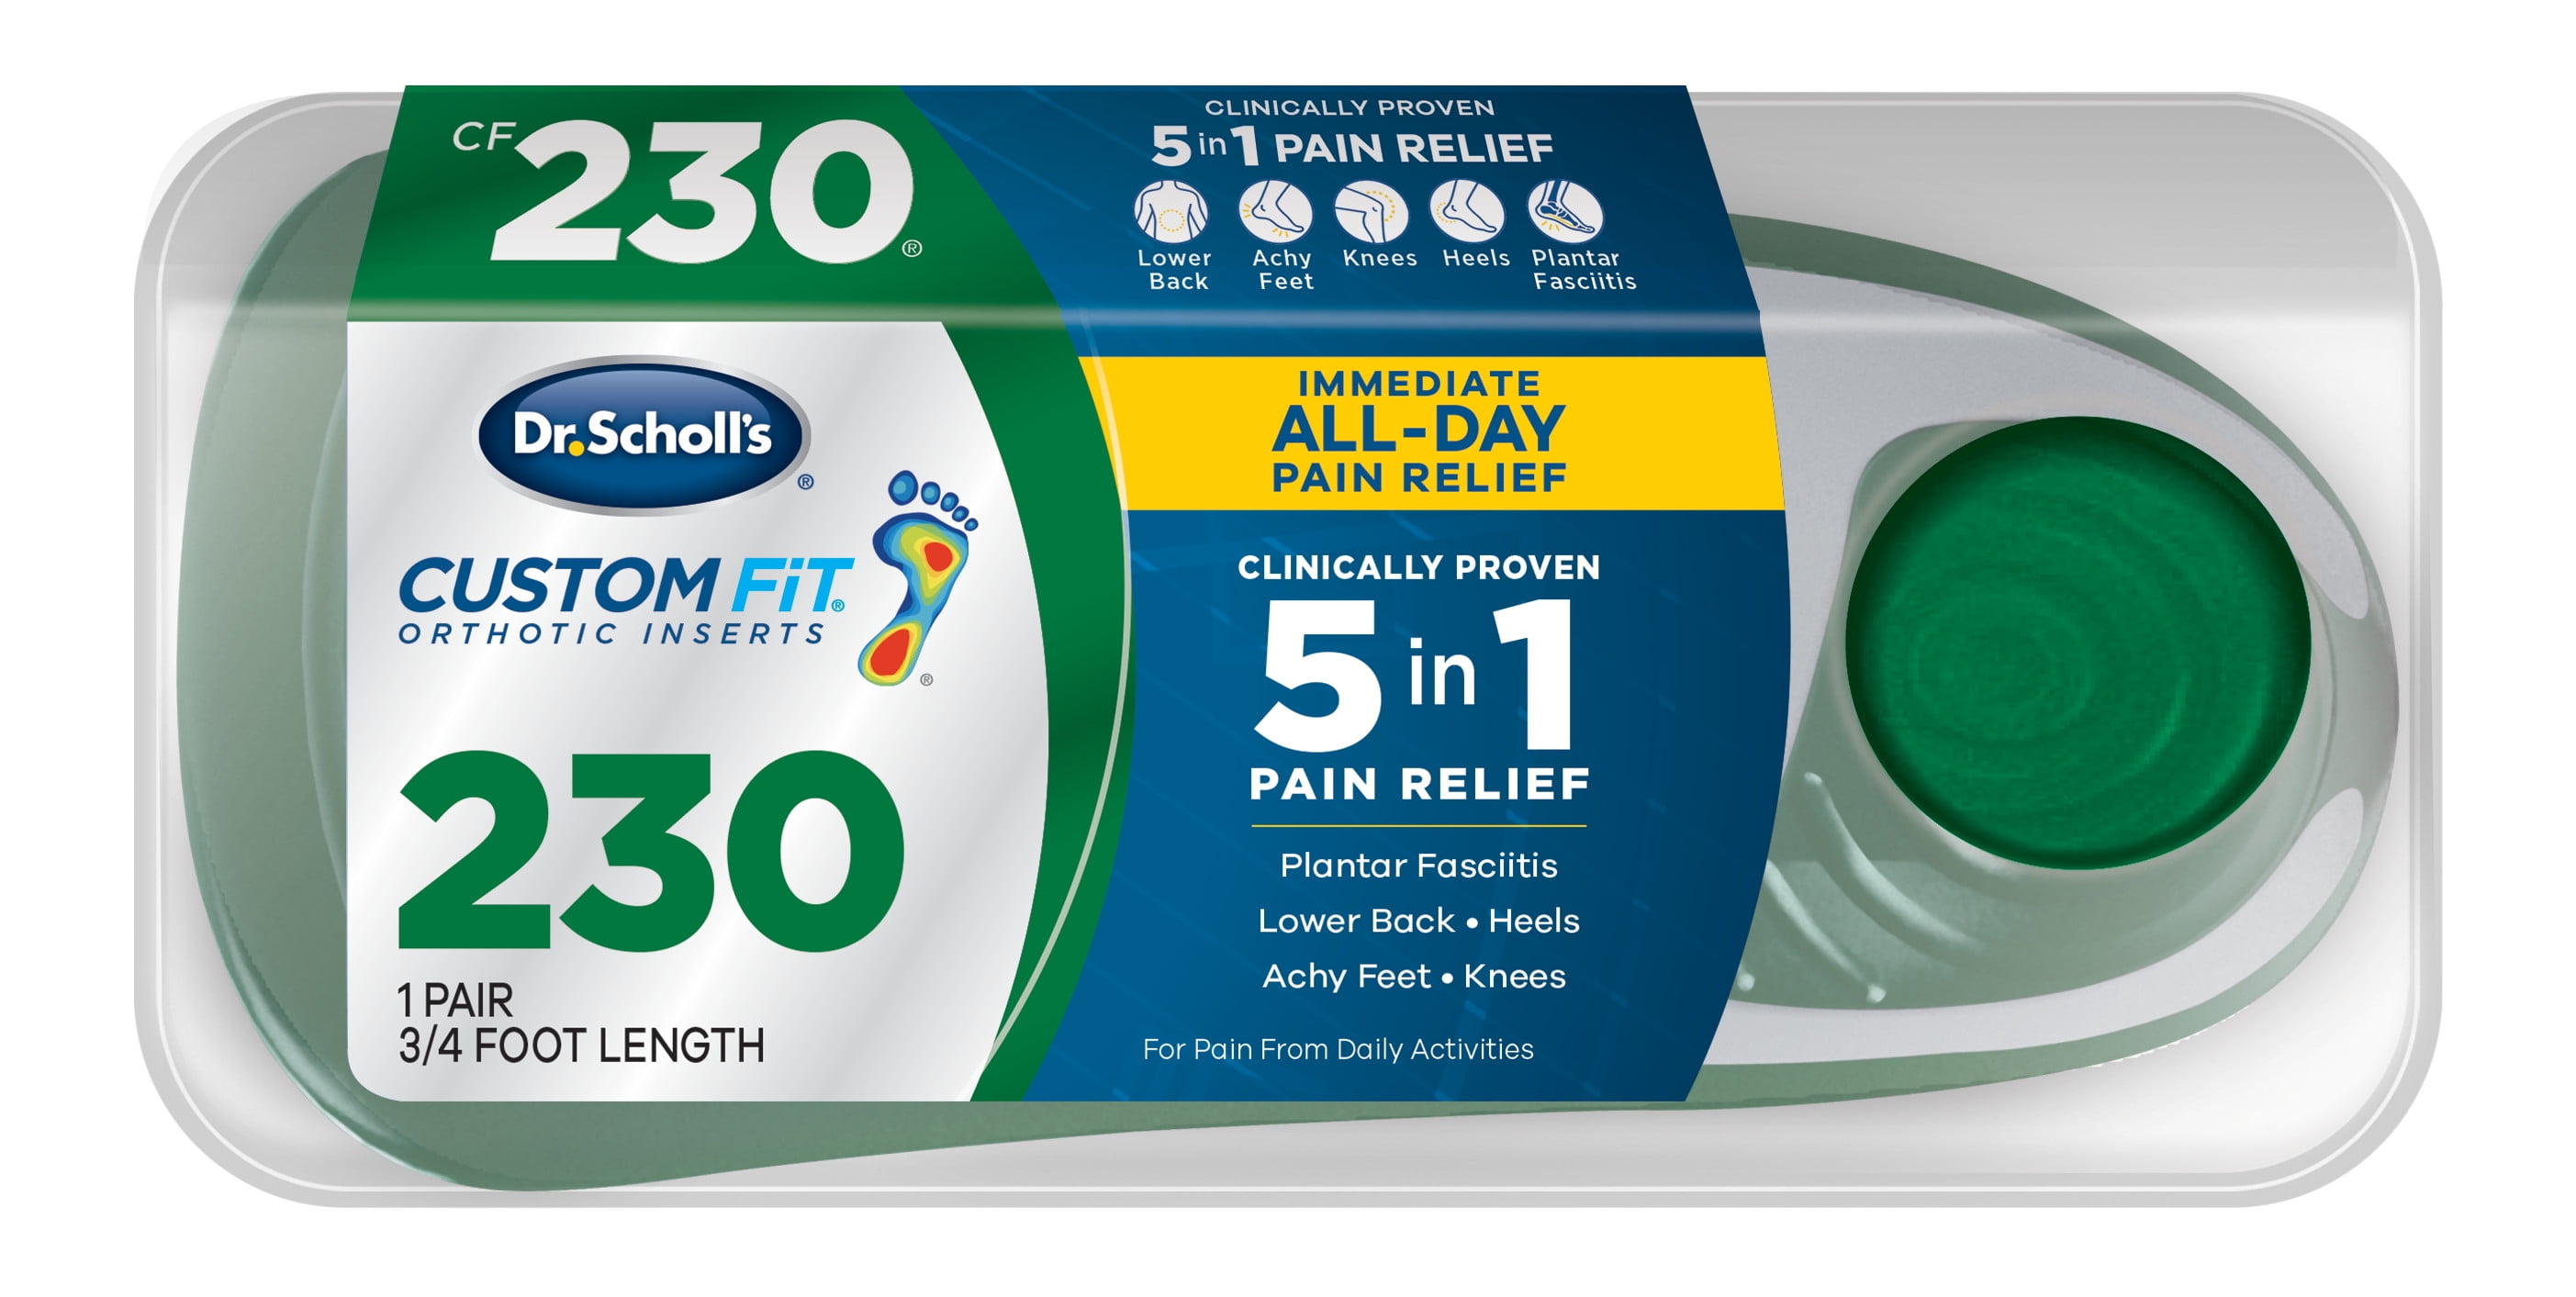 Dr Scholls Custom Fit CF 230 Orthotic Insole Shoe Inserts for Foot Knee and Lower Back Relief 1 Pair